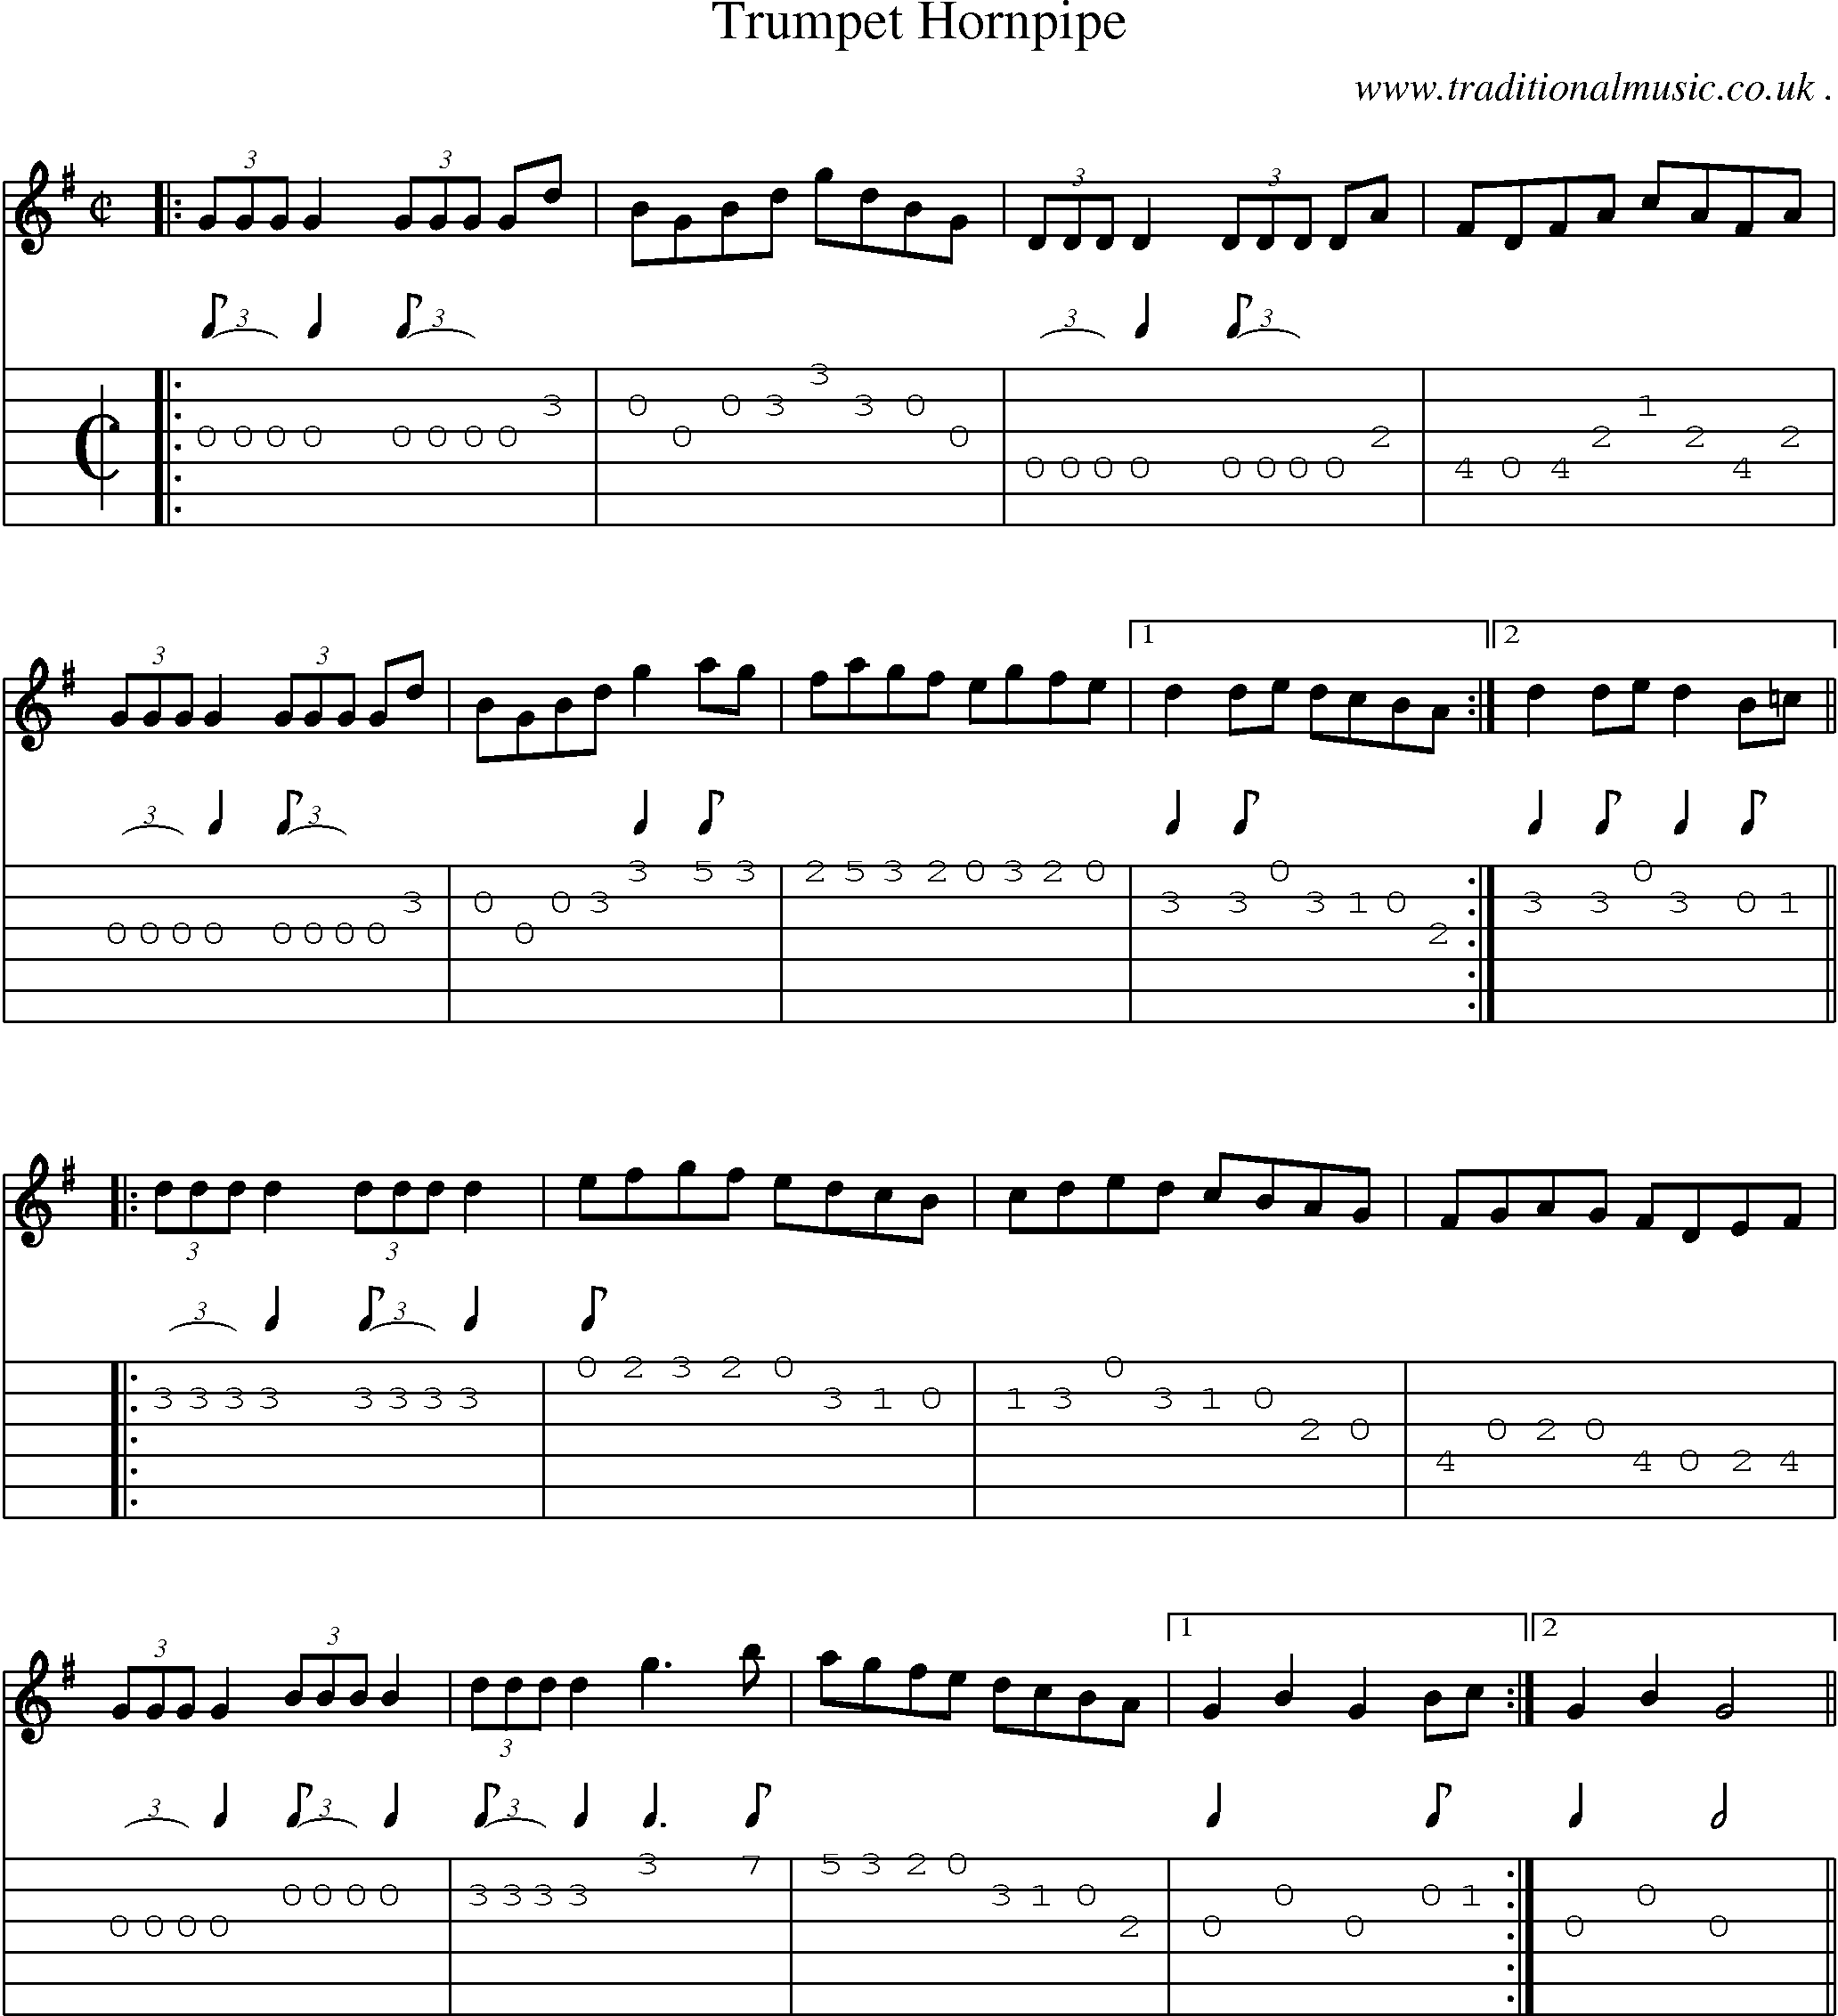 Sheet-Music and Guitar Tabs for Trumpet Hornpipe